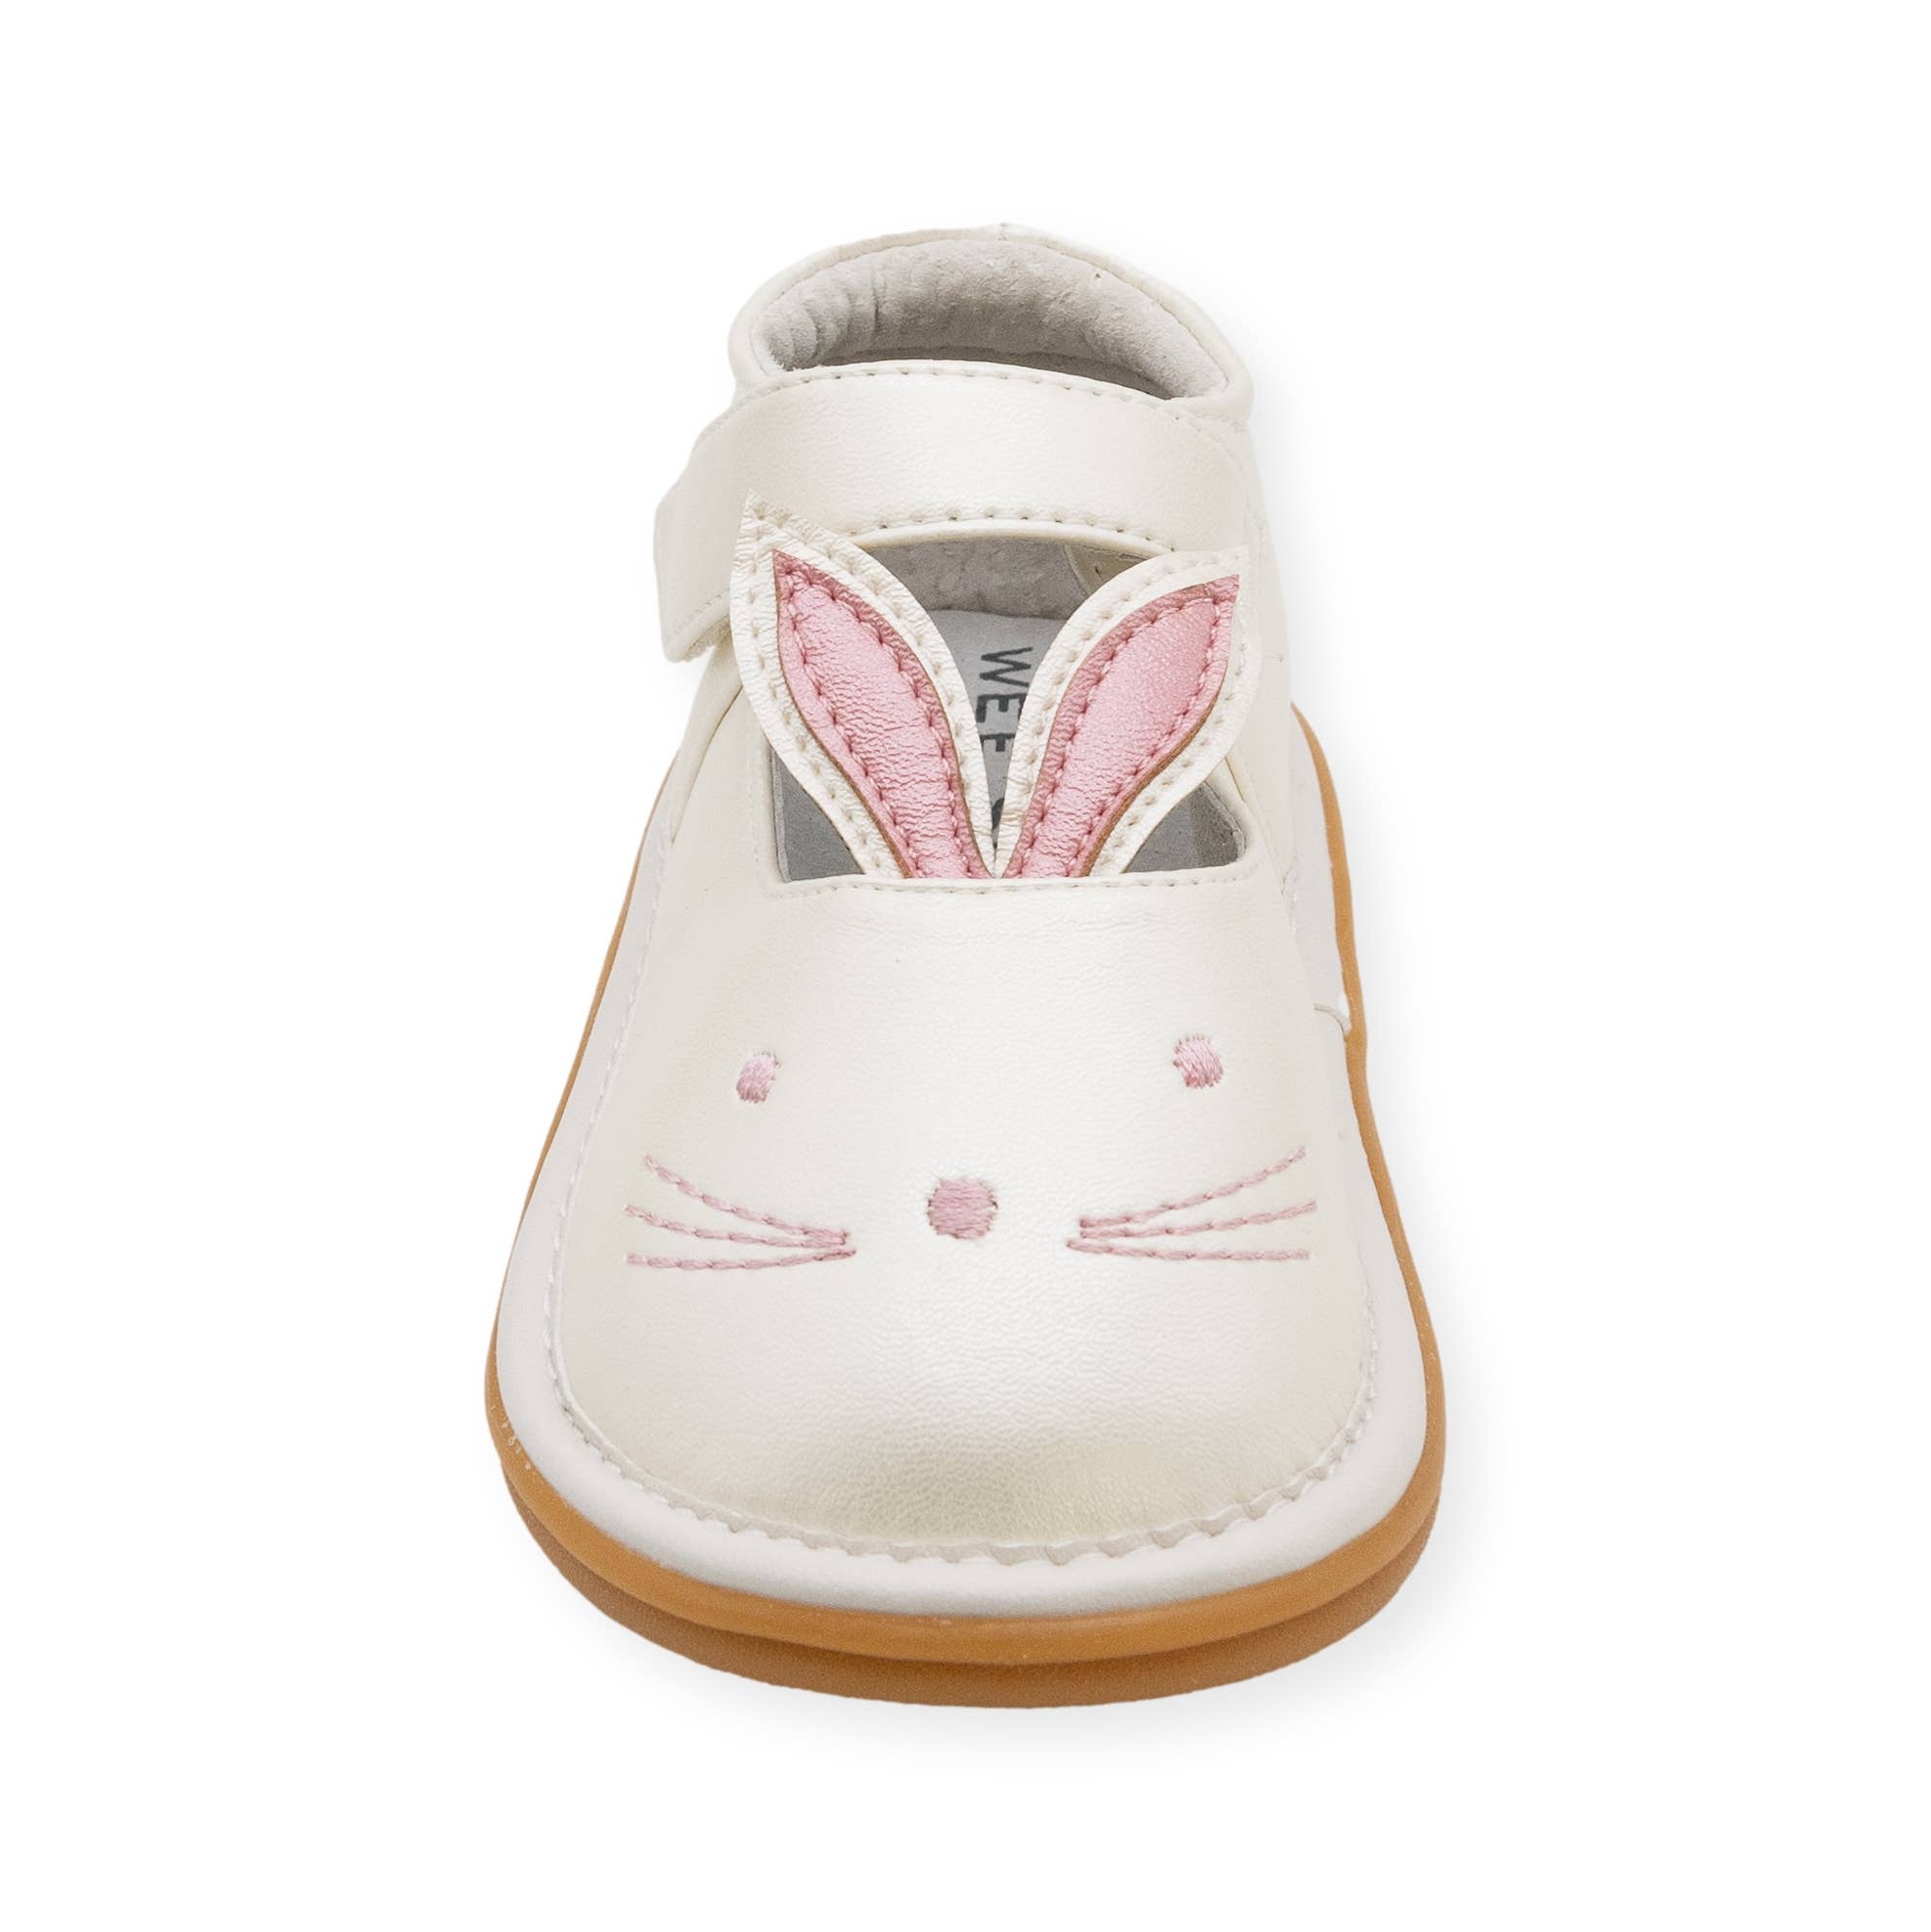 Wee Squeak Bunny Pearl Shoes